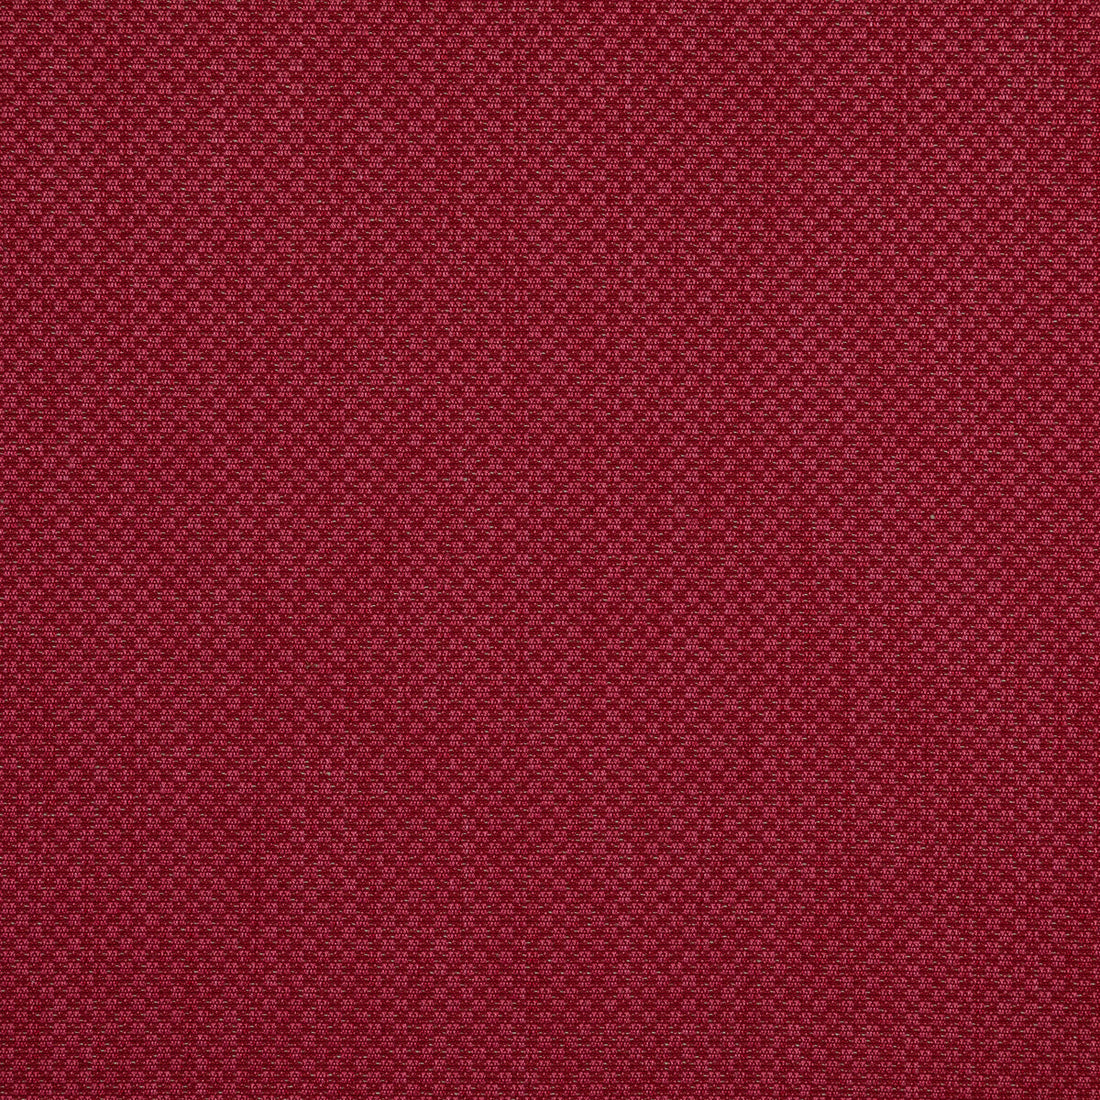 Devon fabric in red color - pattern BFC-3685.19.0 - by Lee Jofa in the Blithfield collection